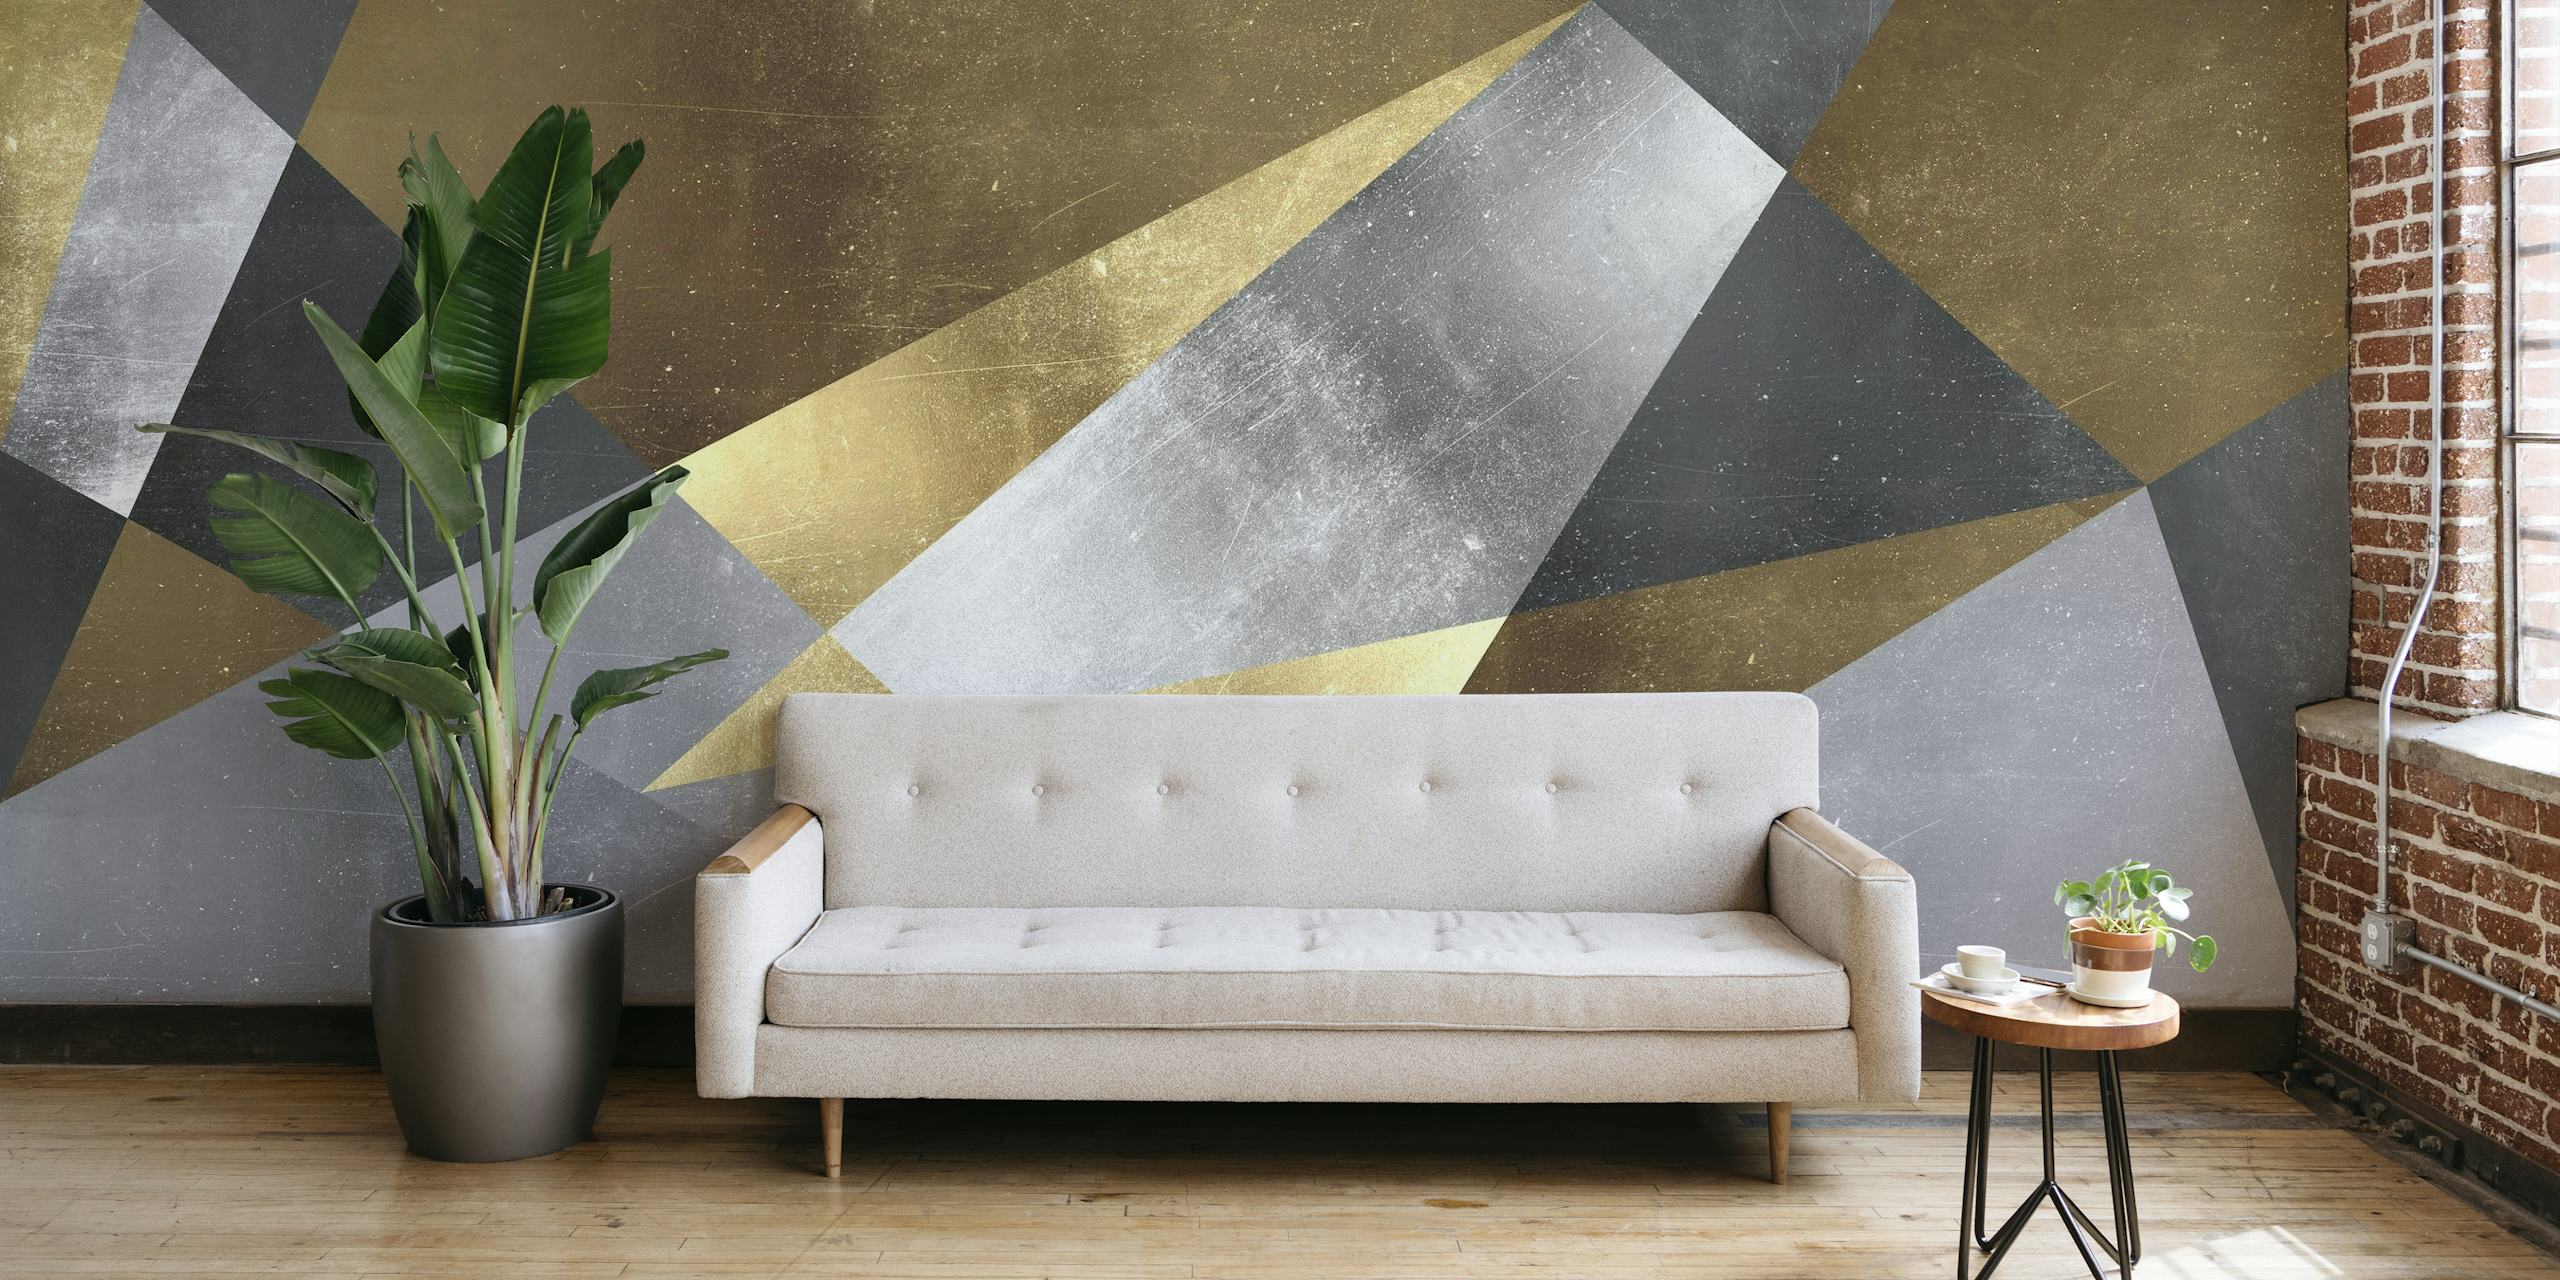 Art gold and silver geometric wall mural with gold and silver triangles